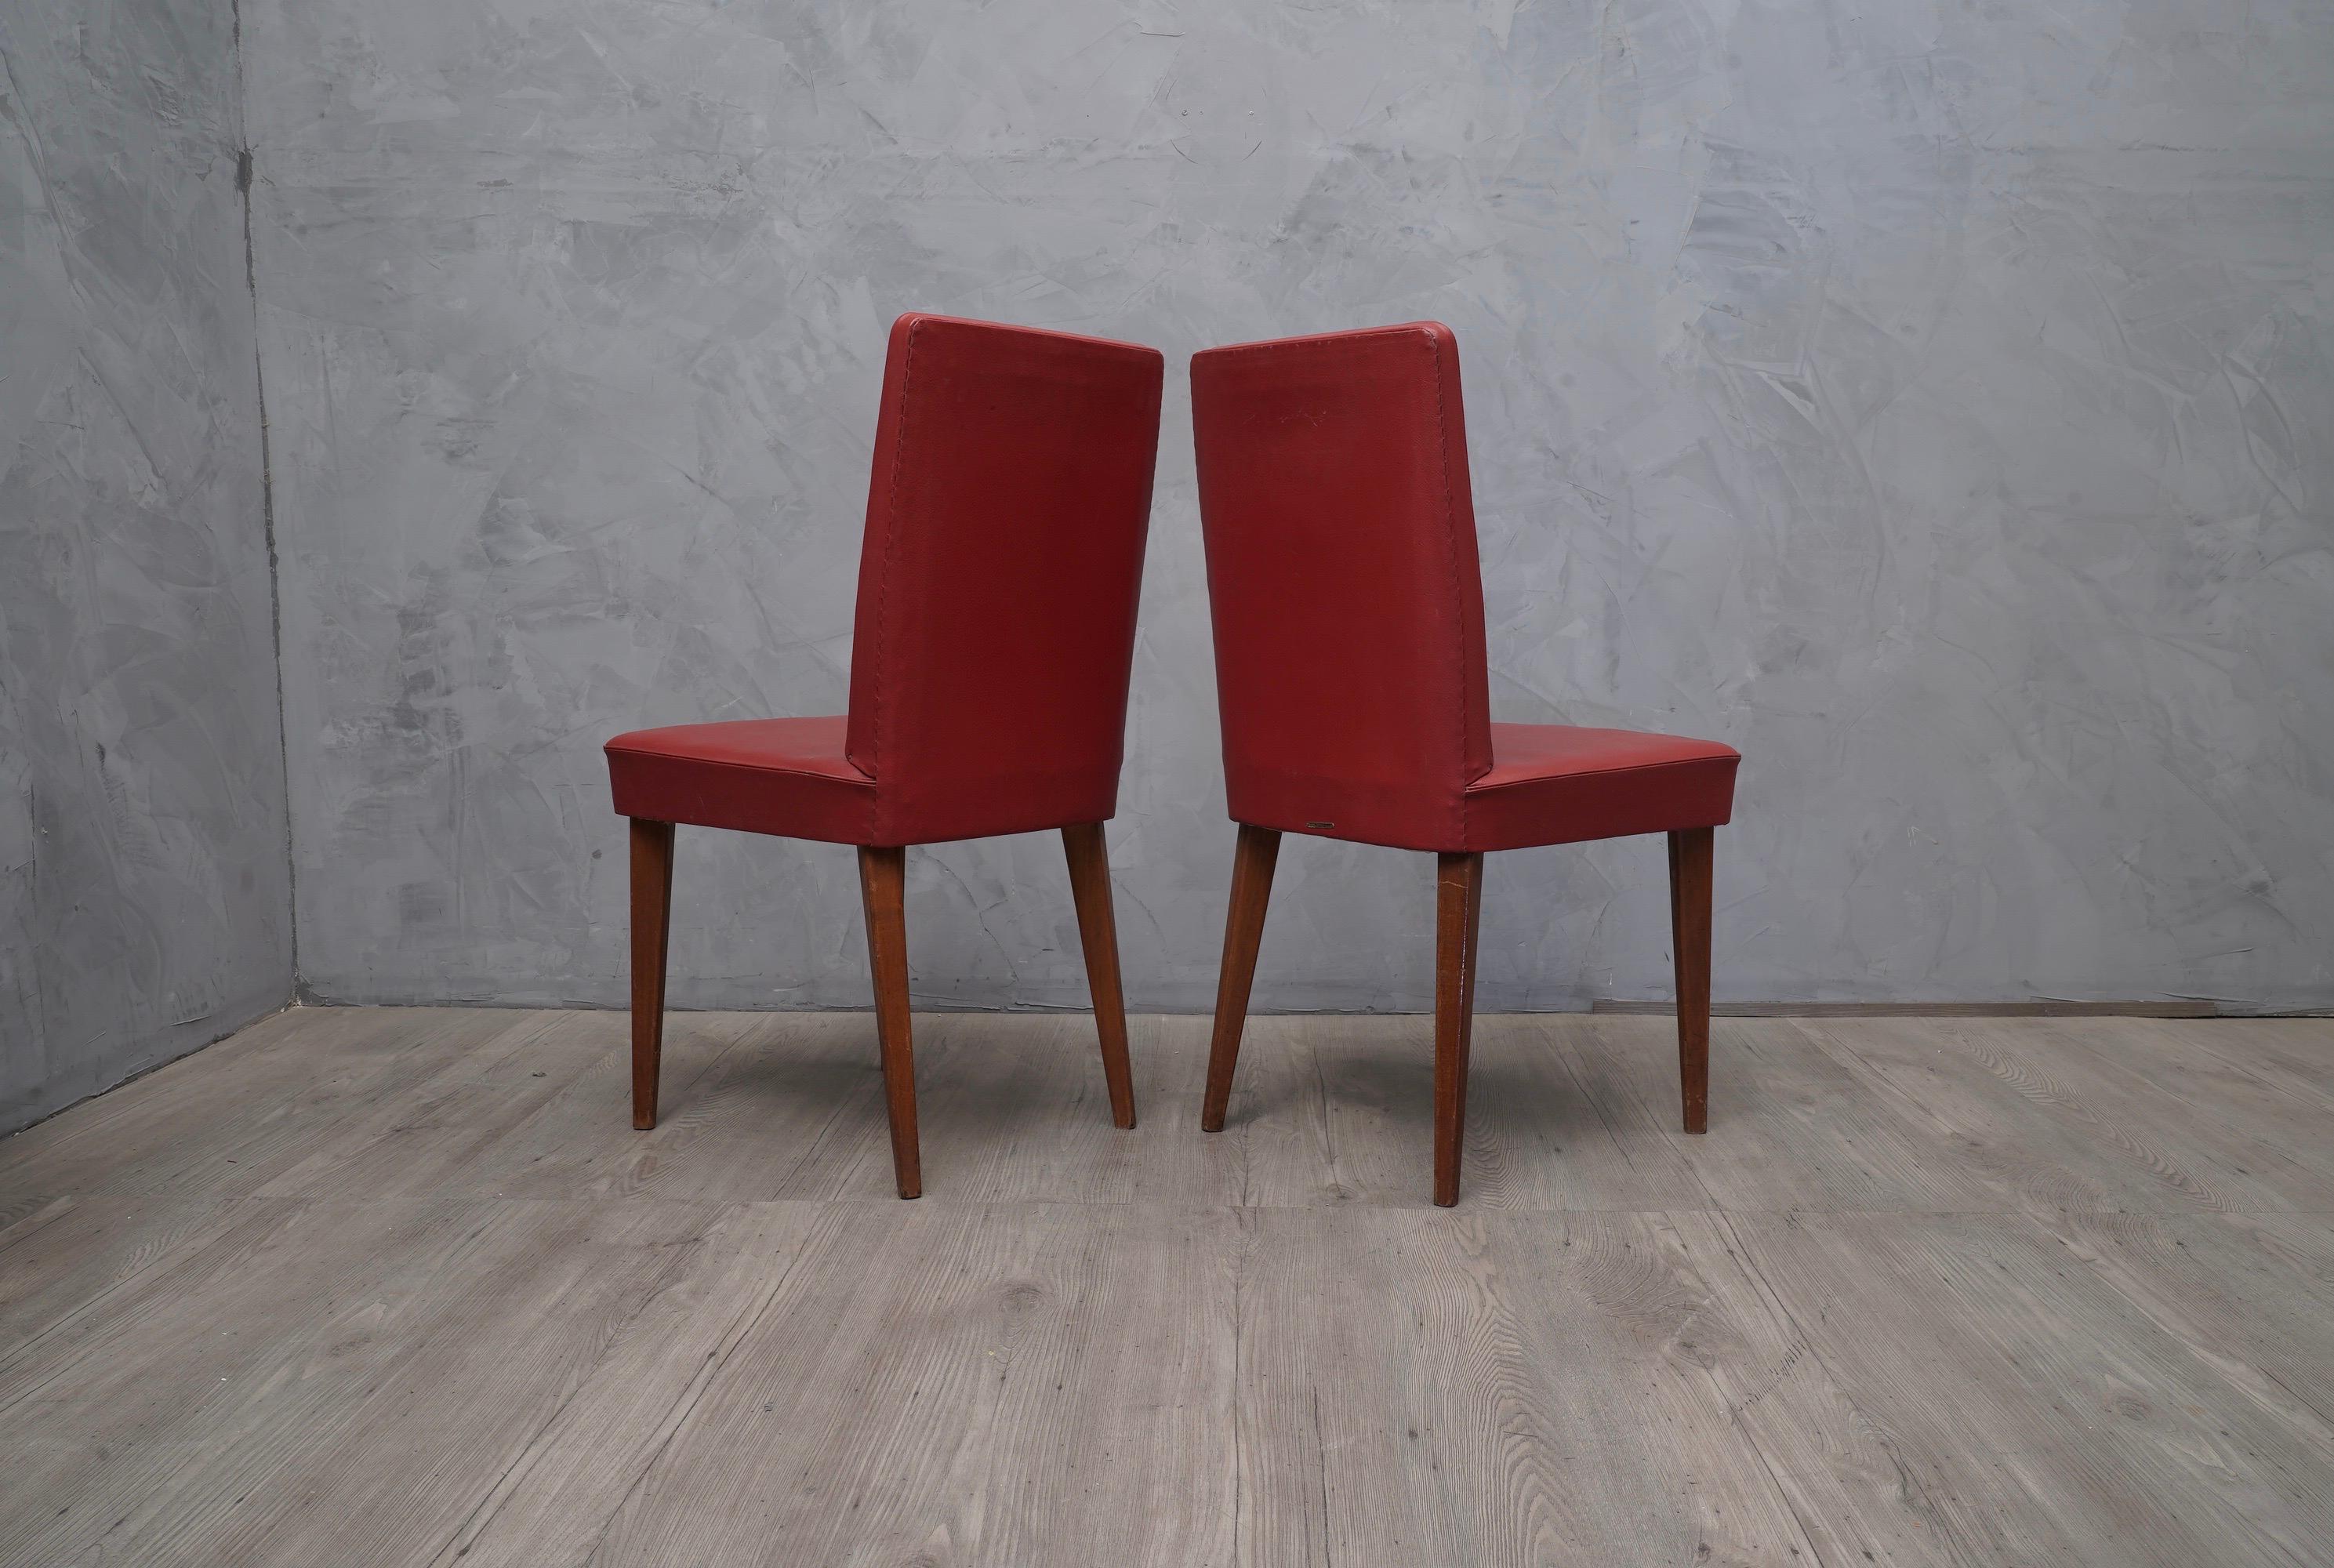 Pair of refined chairs of Anonima Castelli, with a beautiful bright red color.

Wooden structure, covered in red eco leather, original of the period. Four legs in oakwood lacquered. As you can see from the photos, it has a hallmark of the